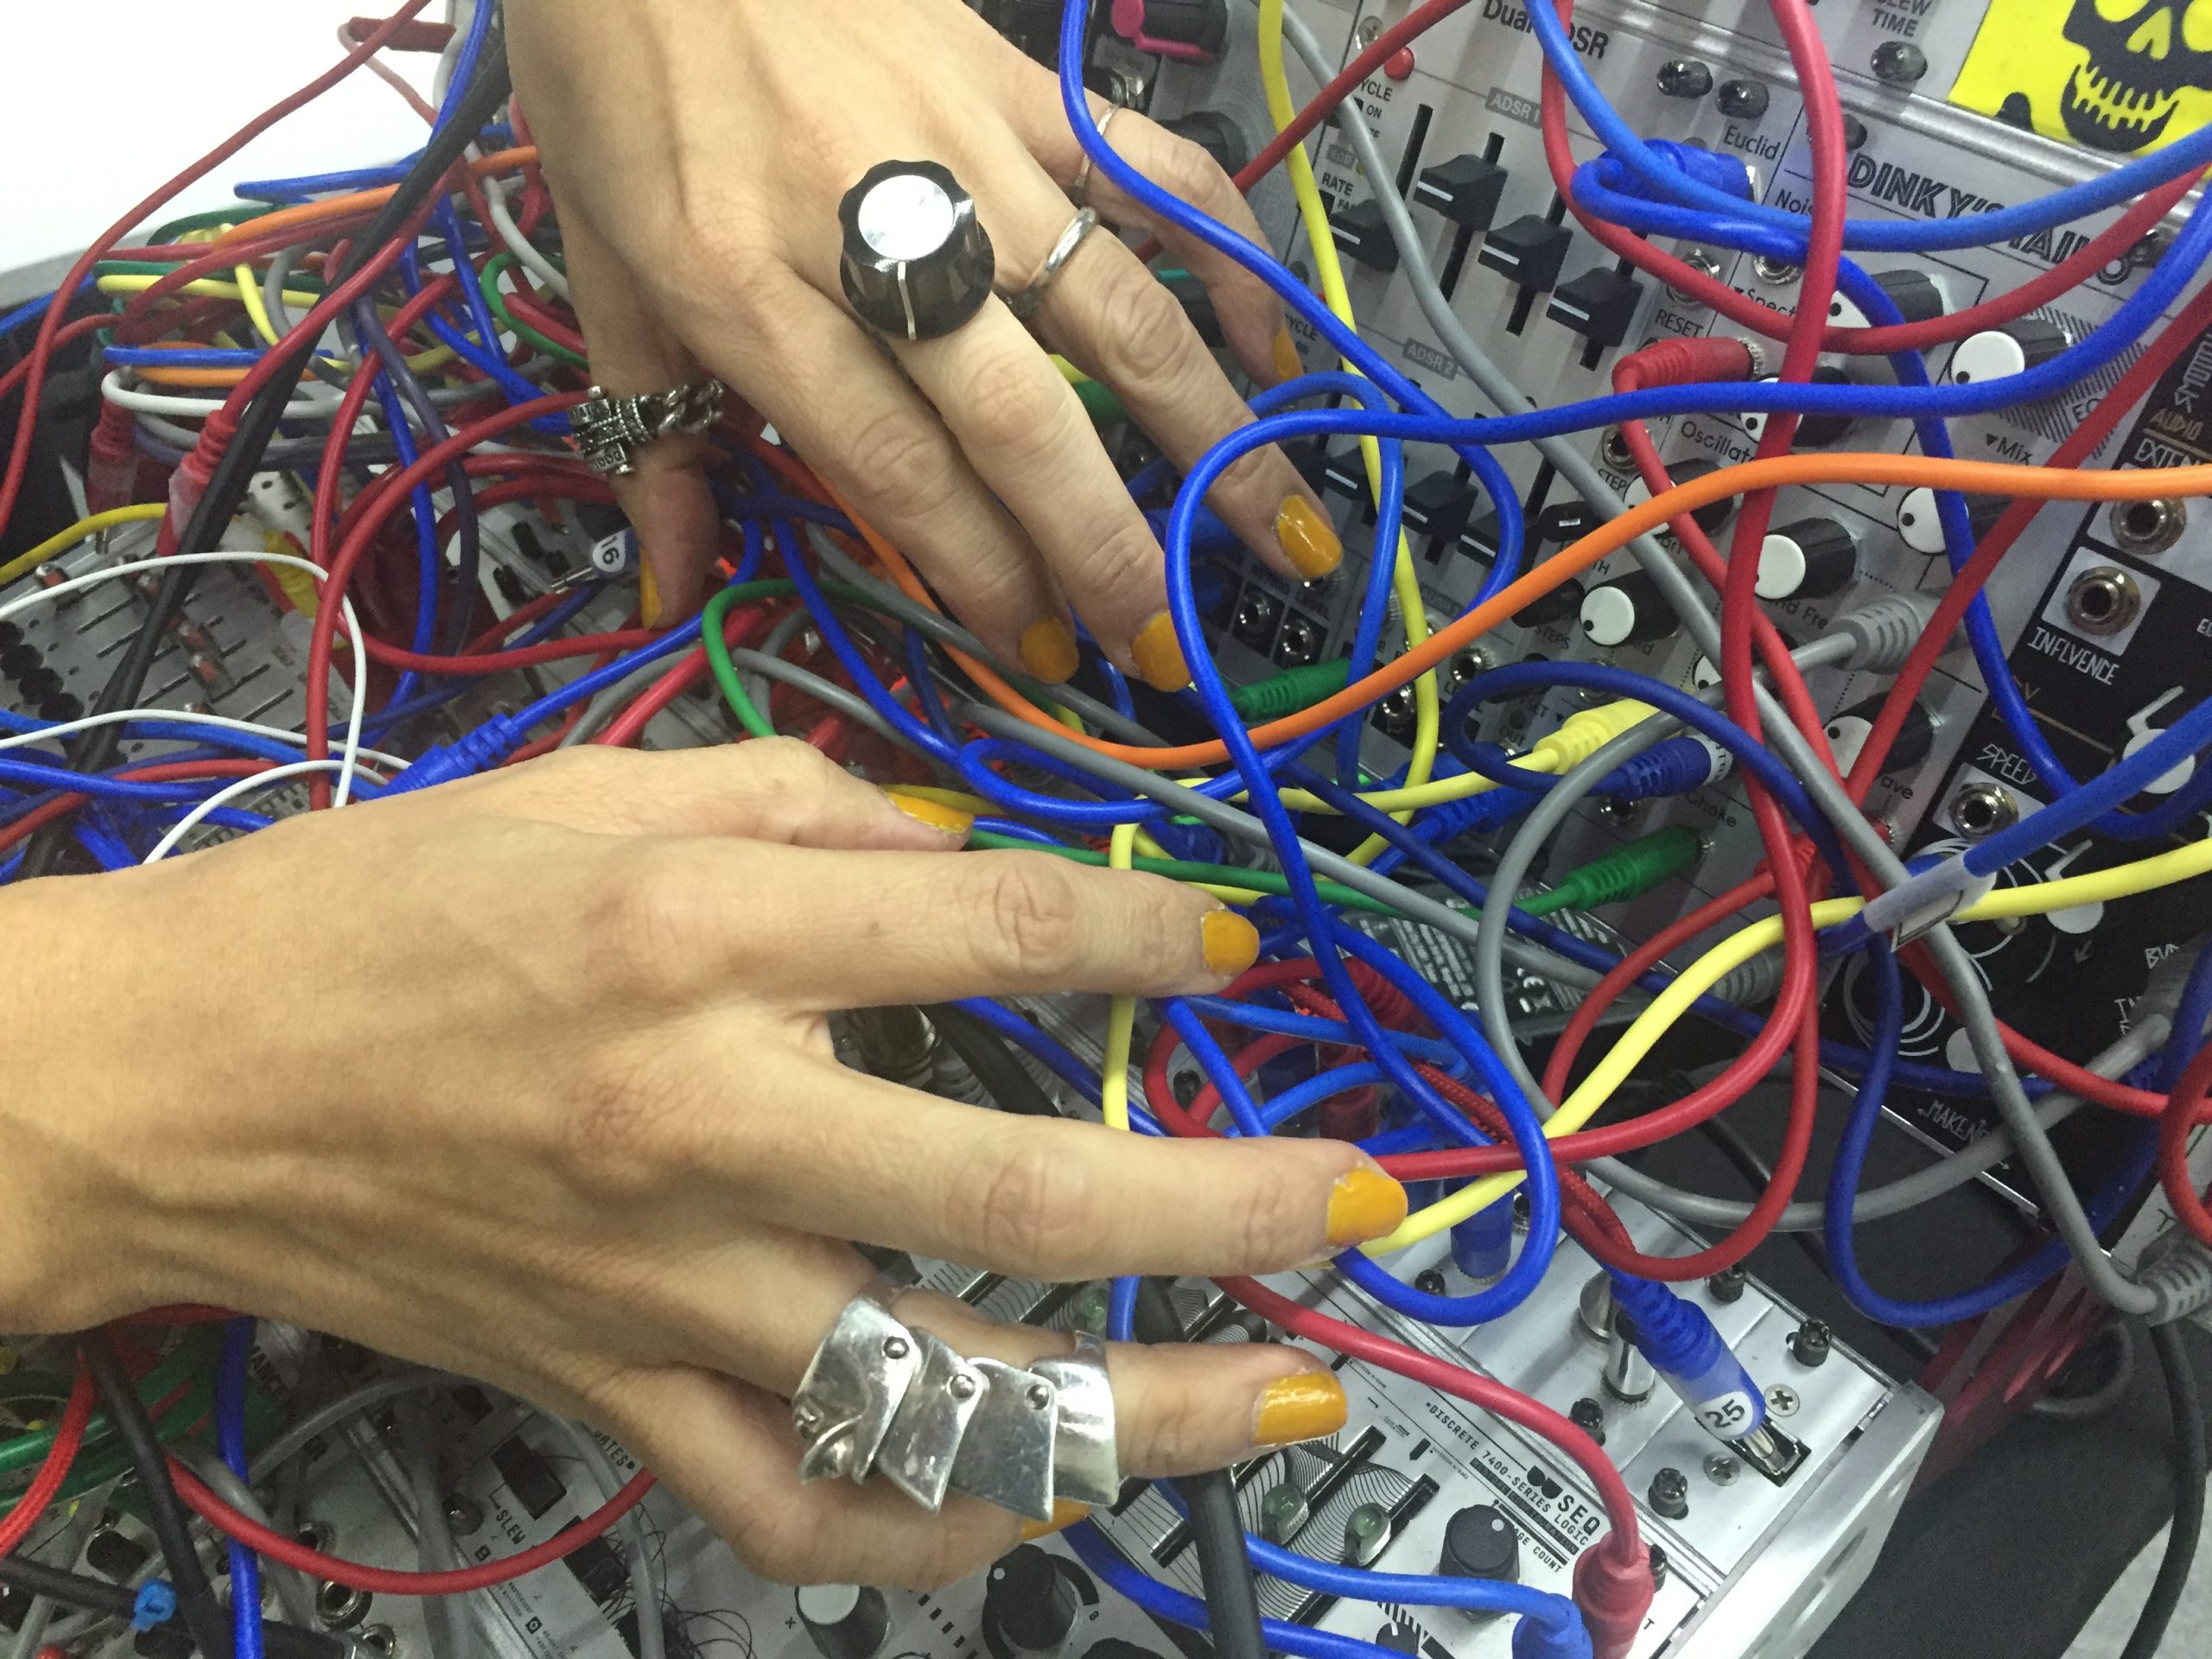 Galcid's hands on synths